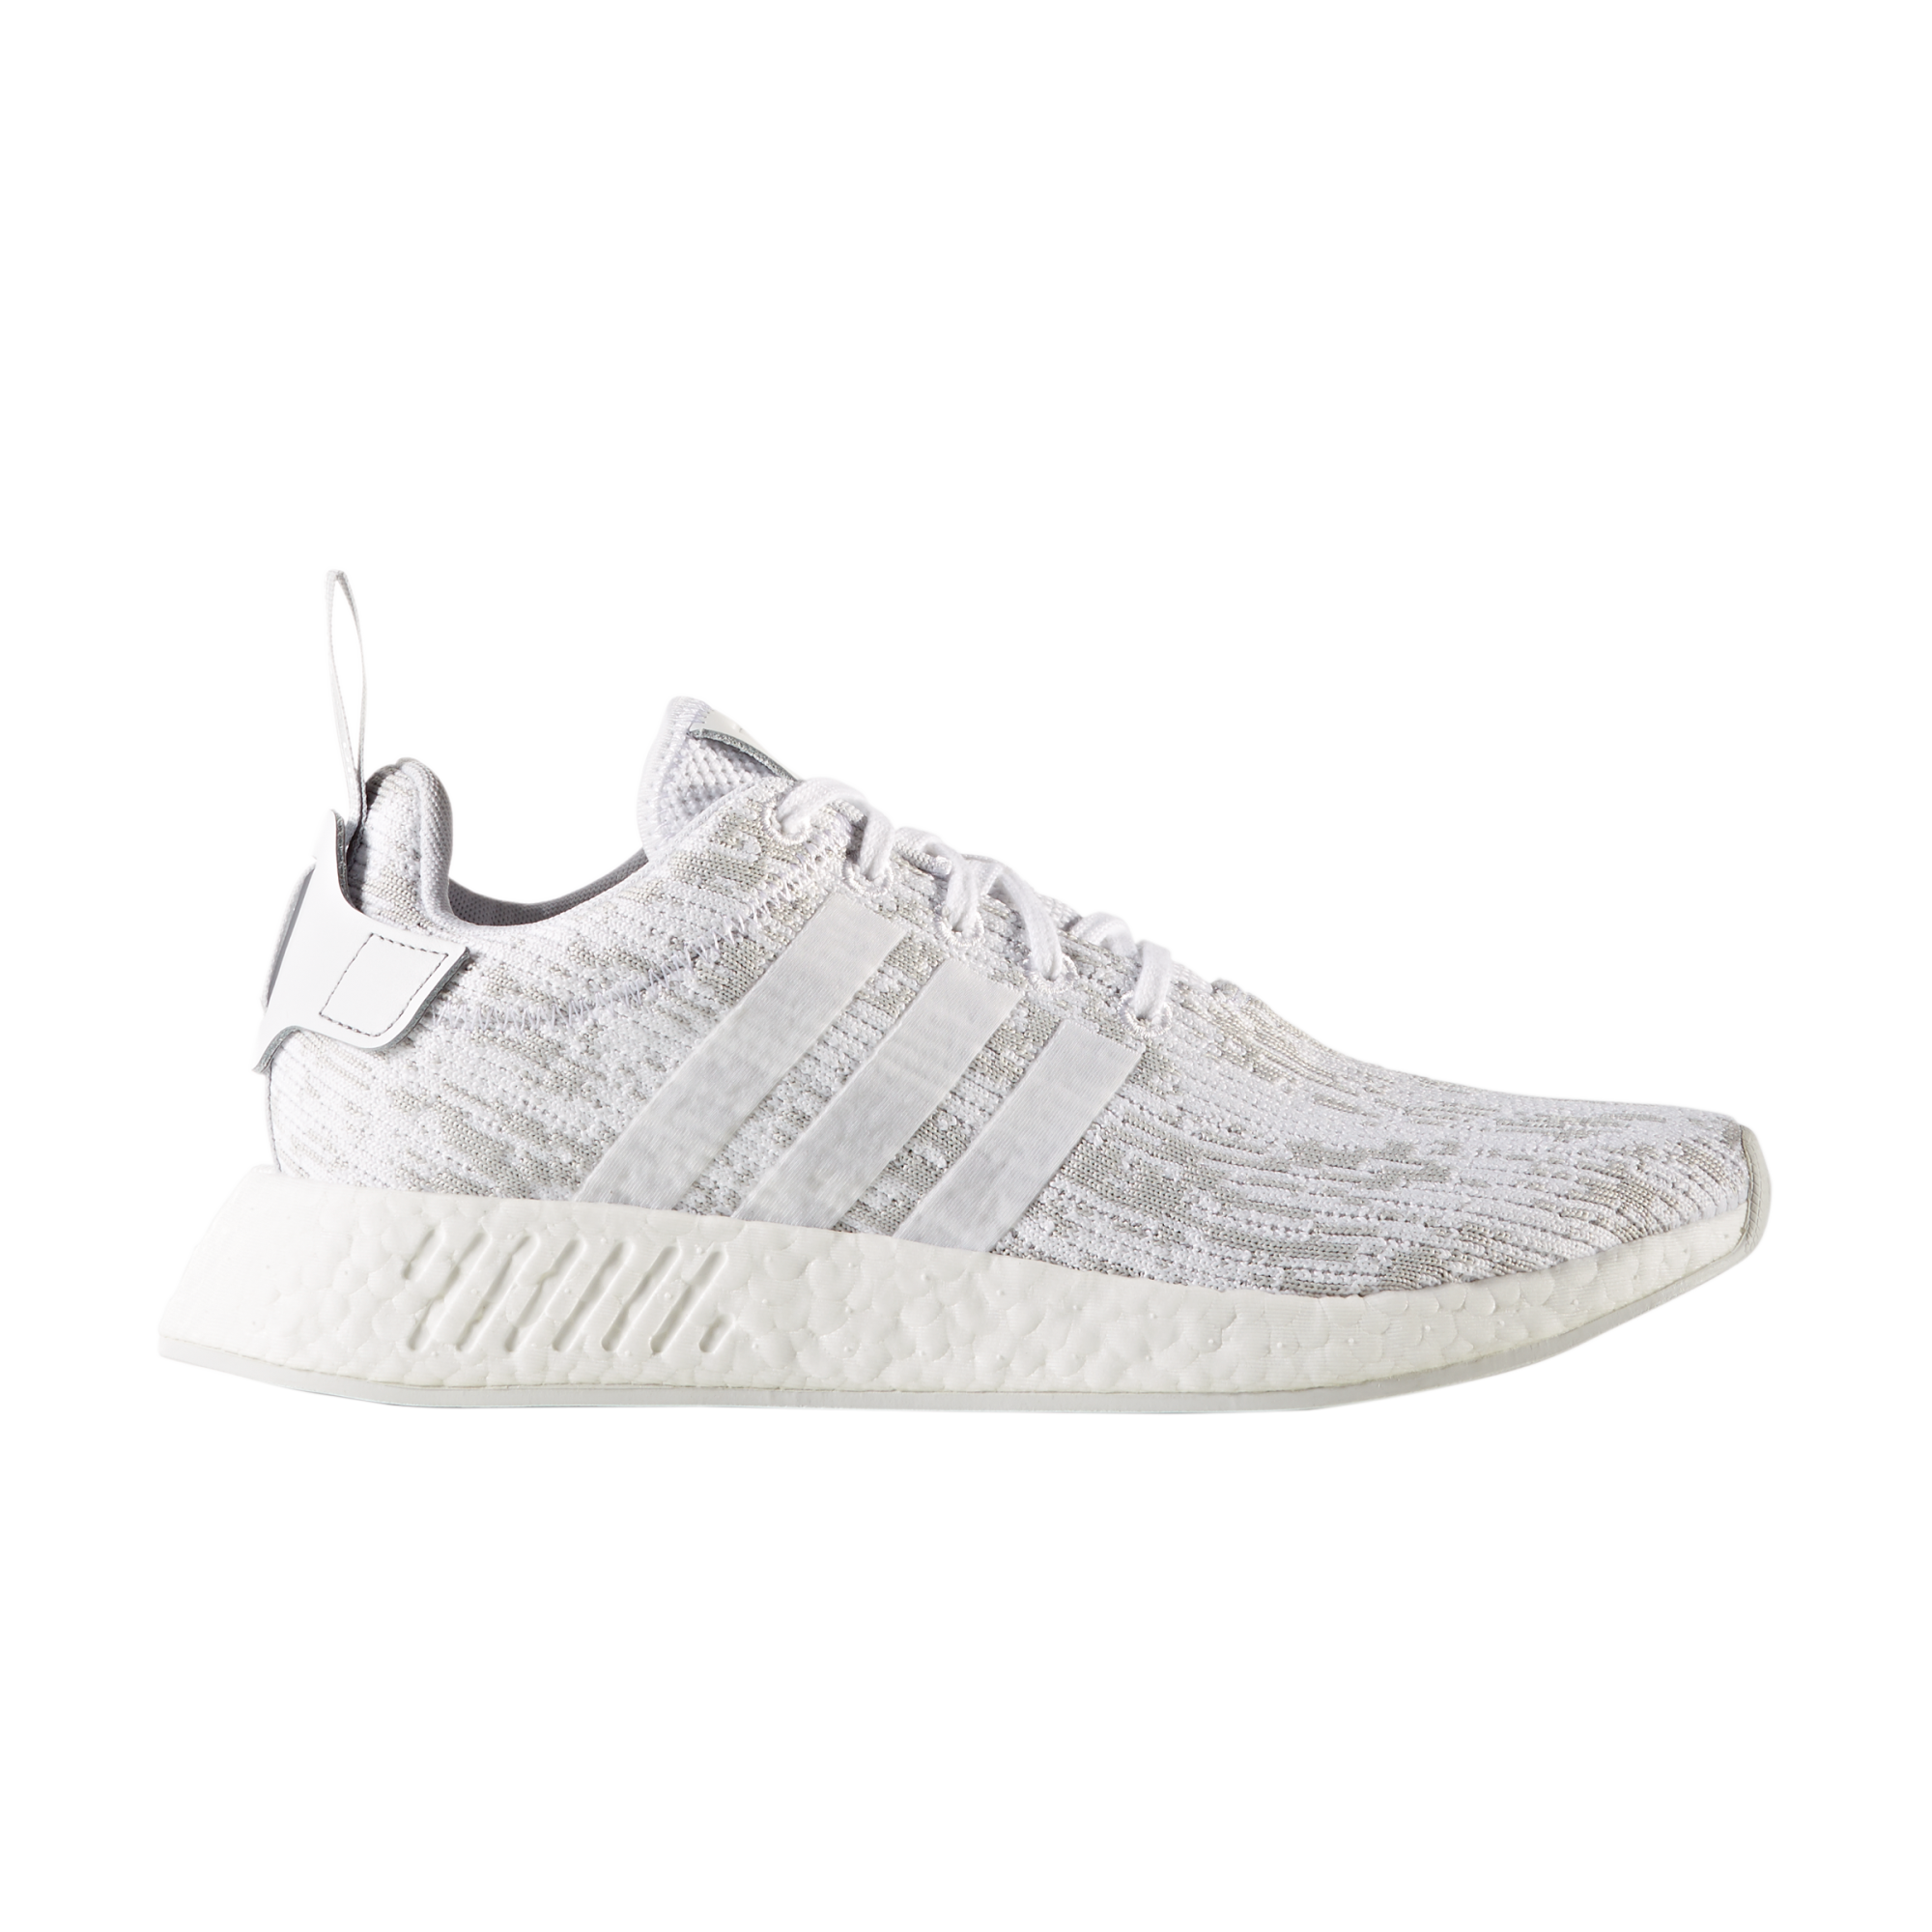 adidas nmd r1 grey and white womens